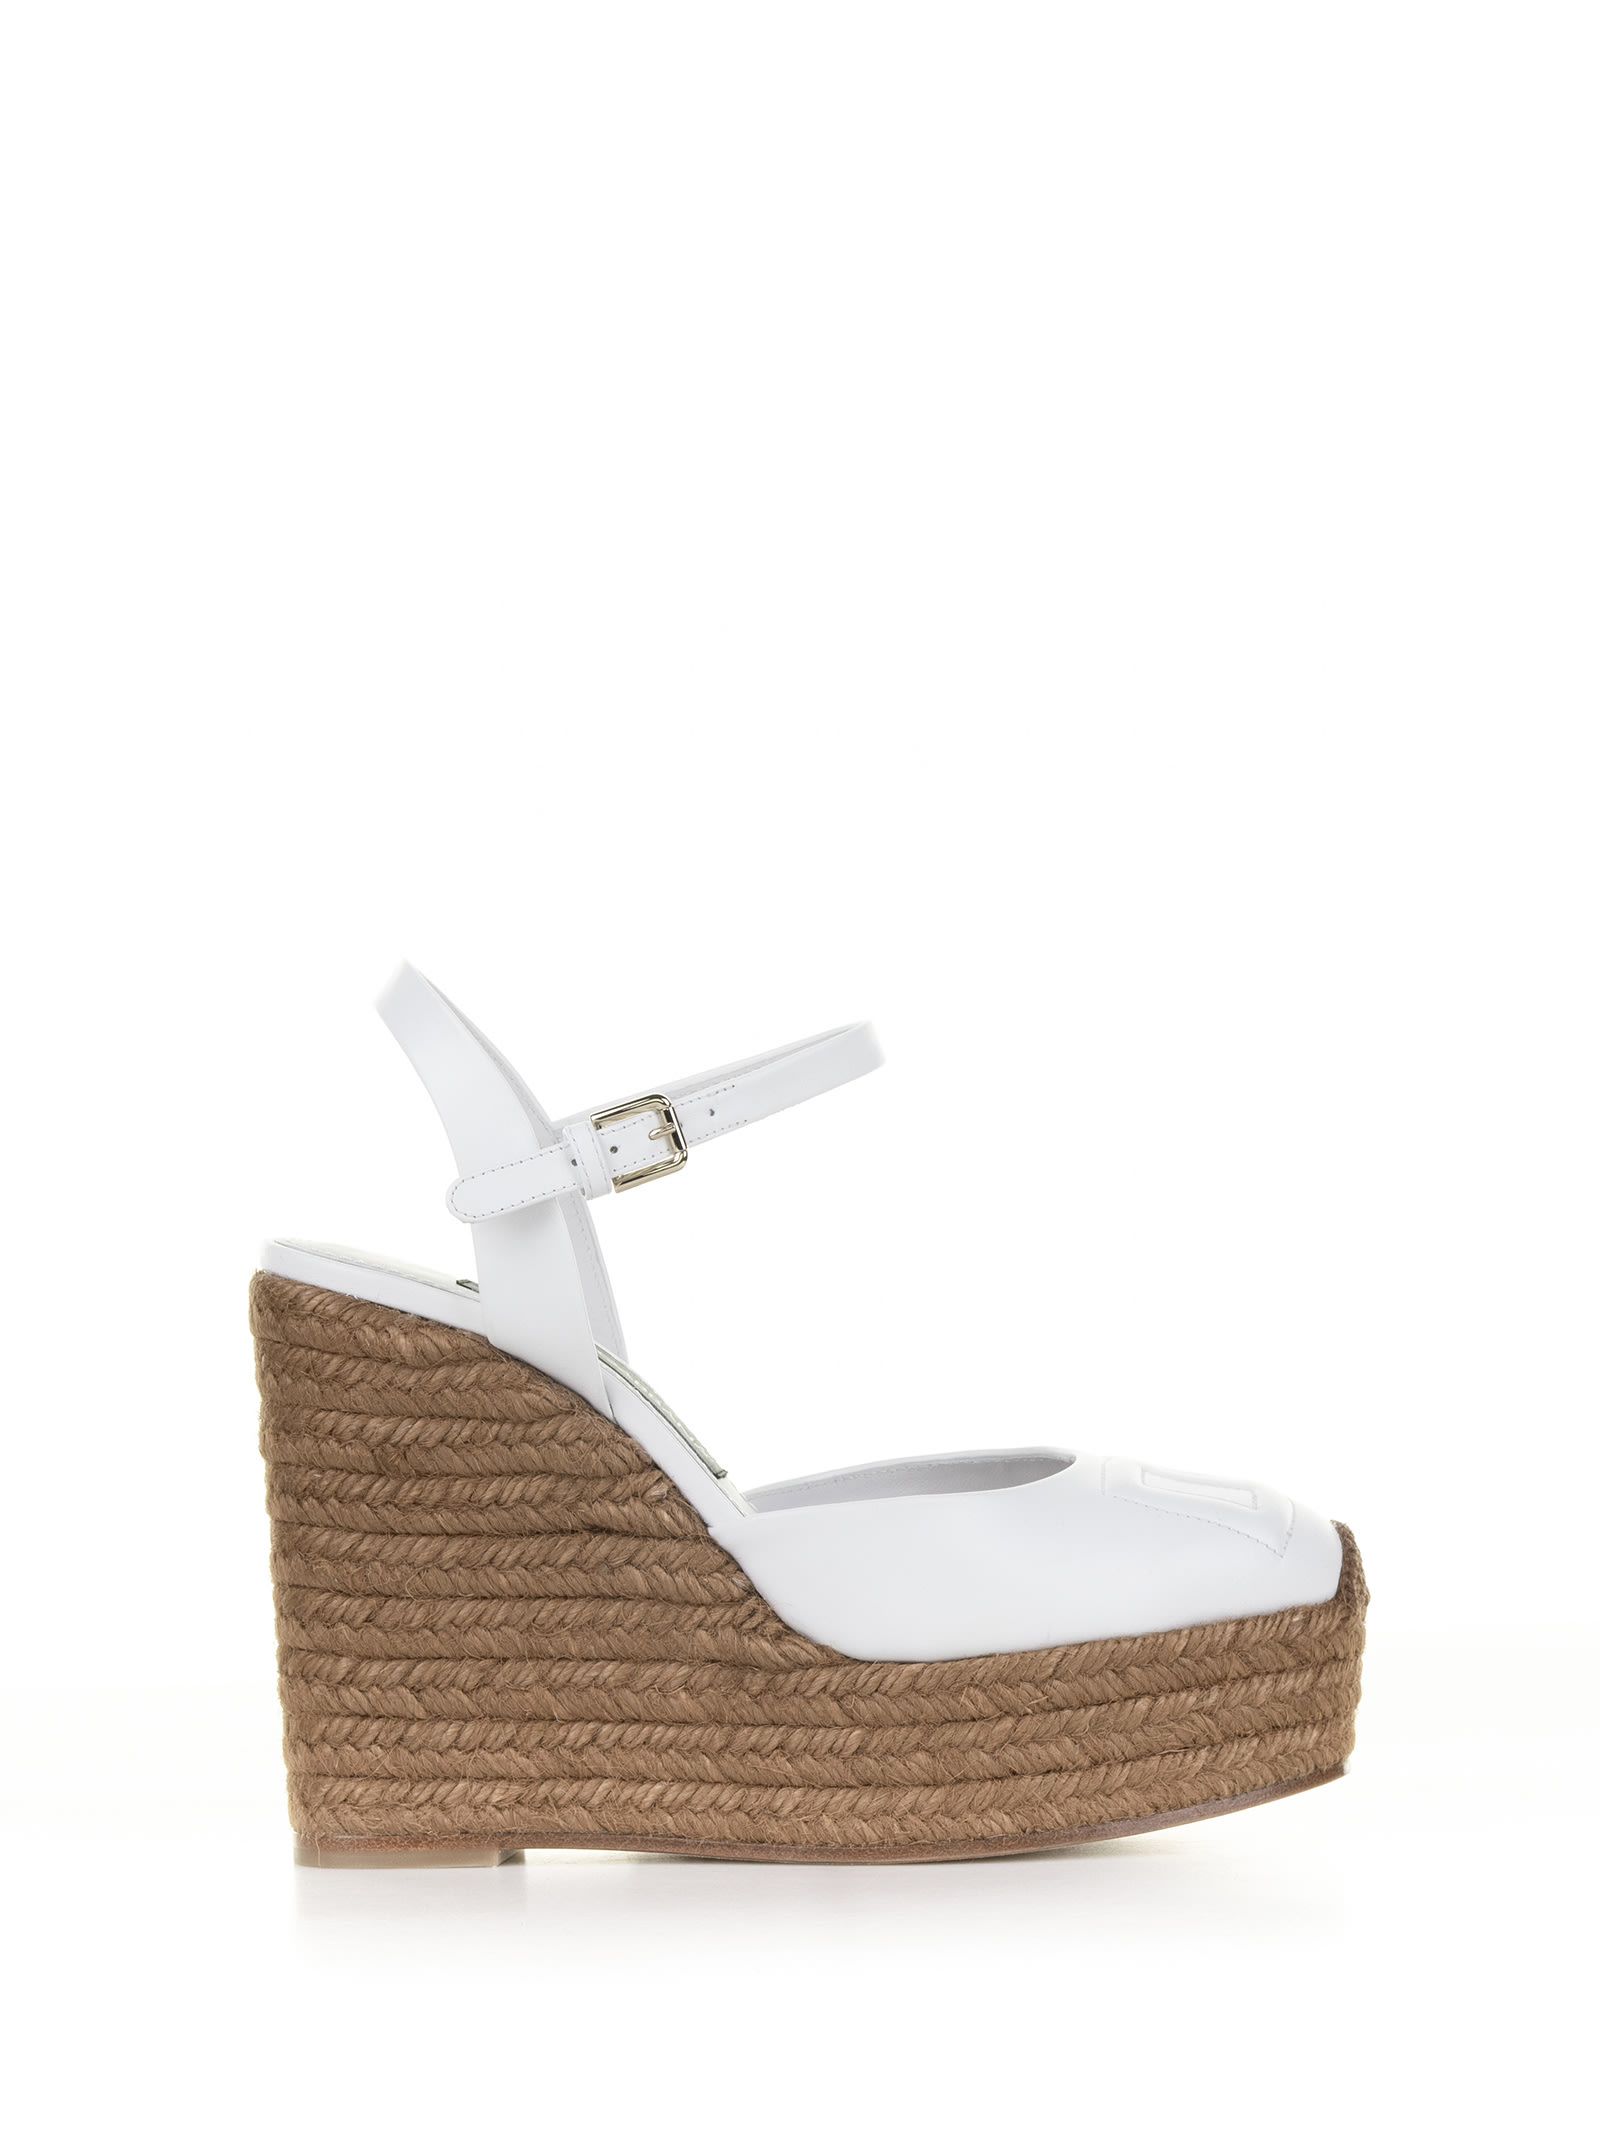 Dolce & Gabbana White Leather And Rope Wedge In Bianco Ottico